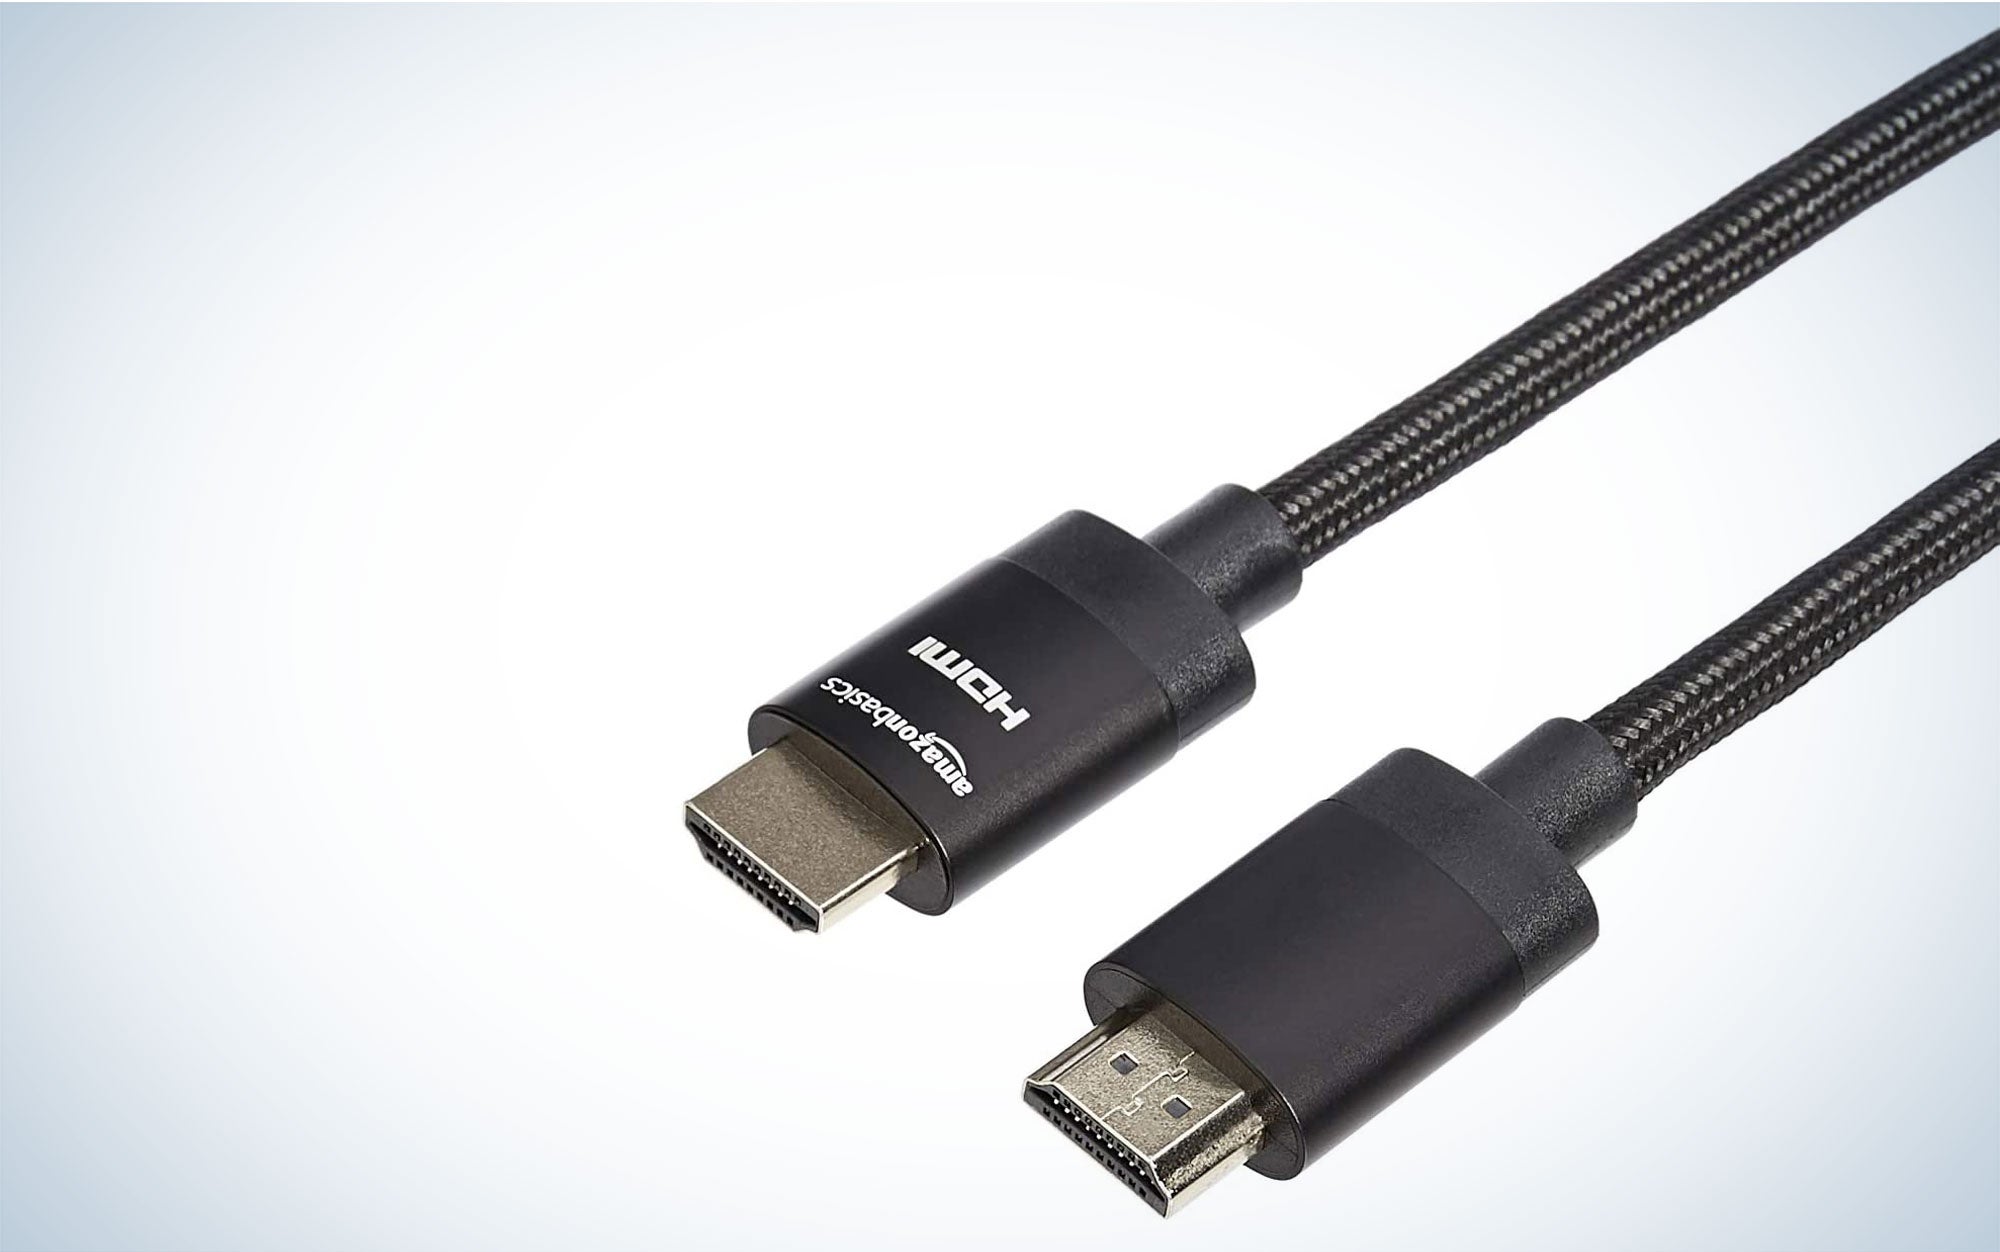 The Amazon Basics premium HDMI cable is a black, braided cable.